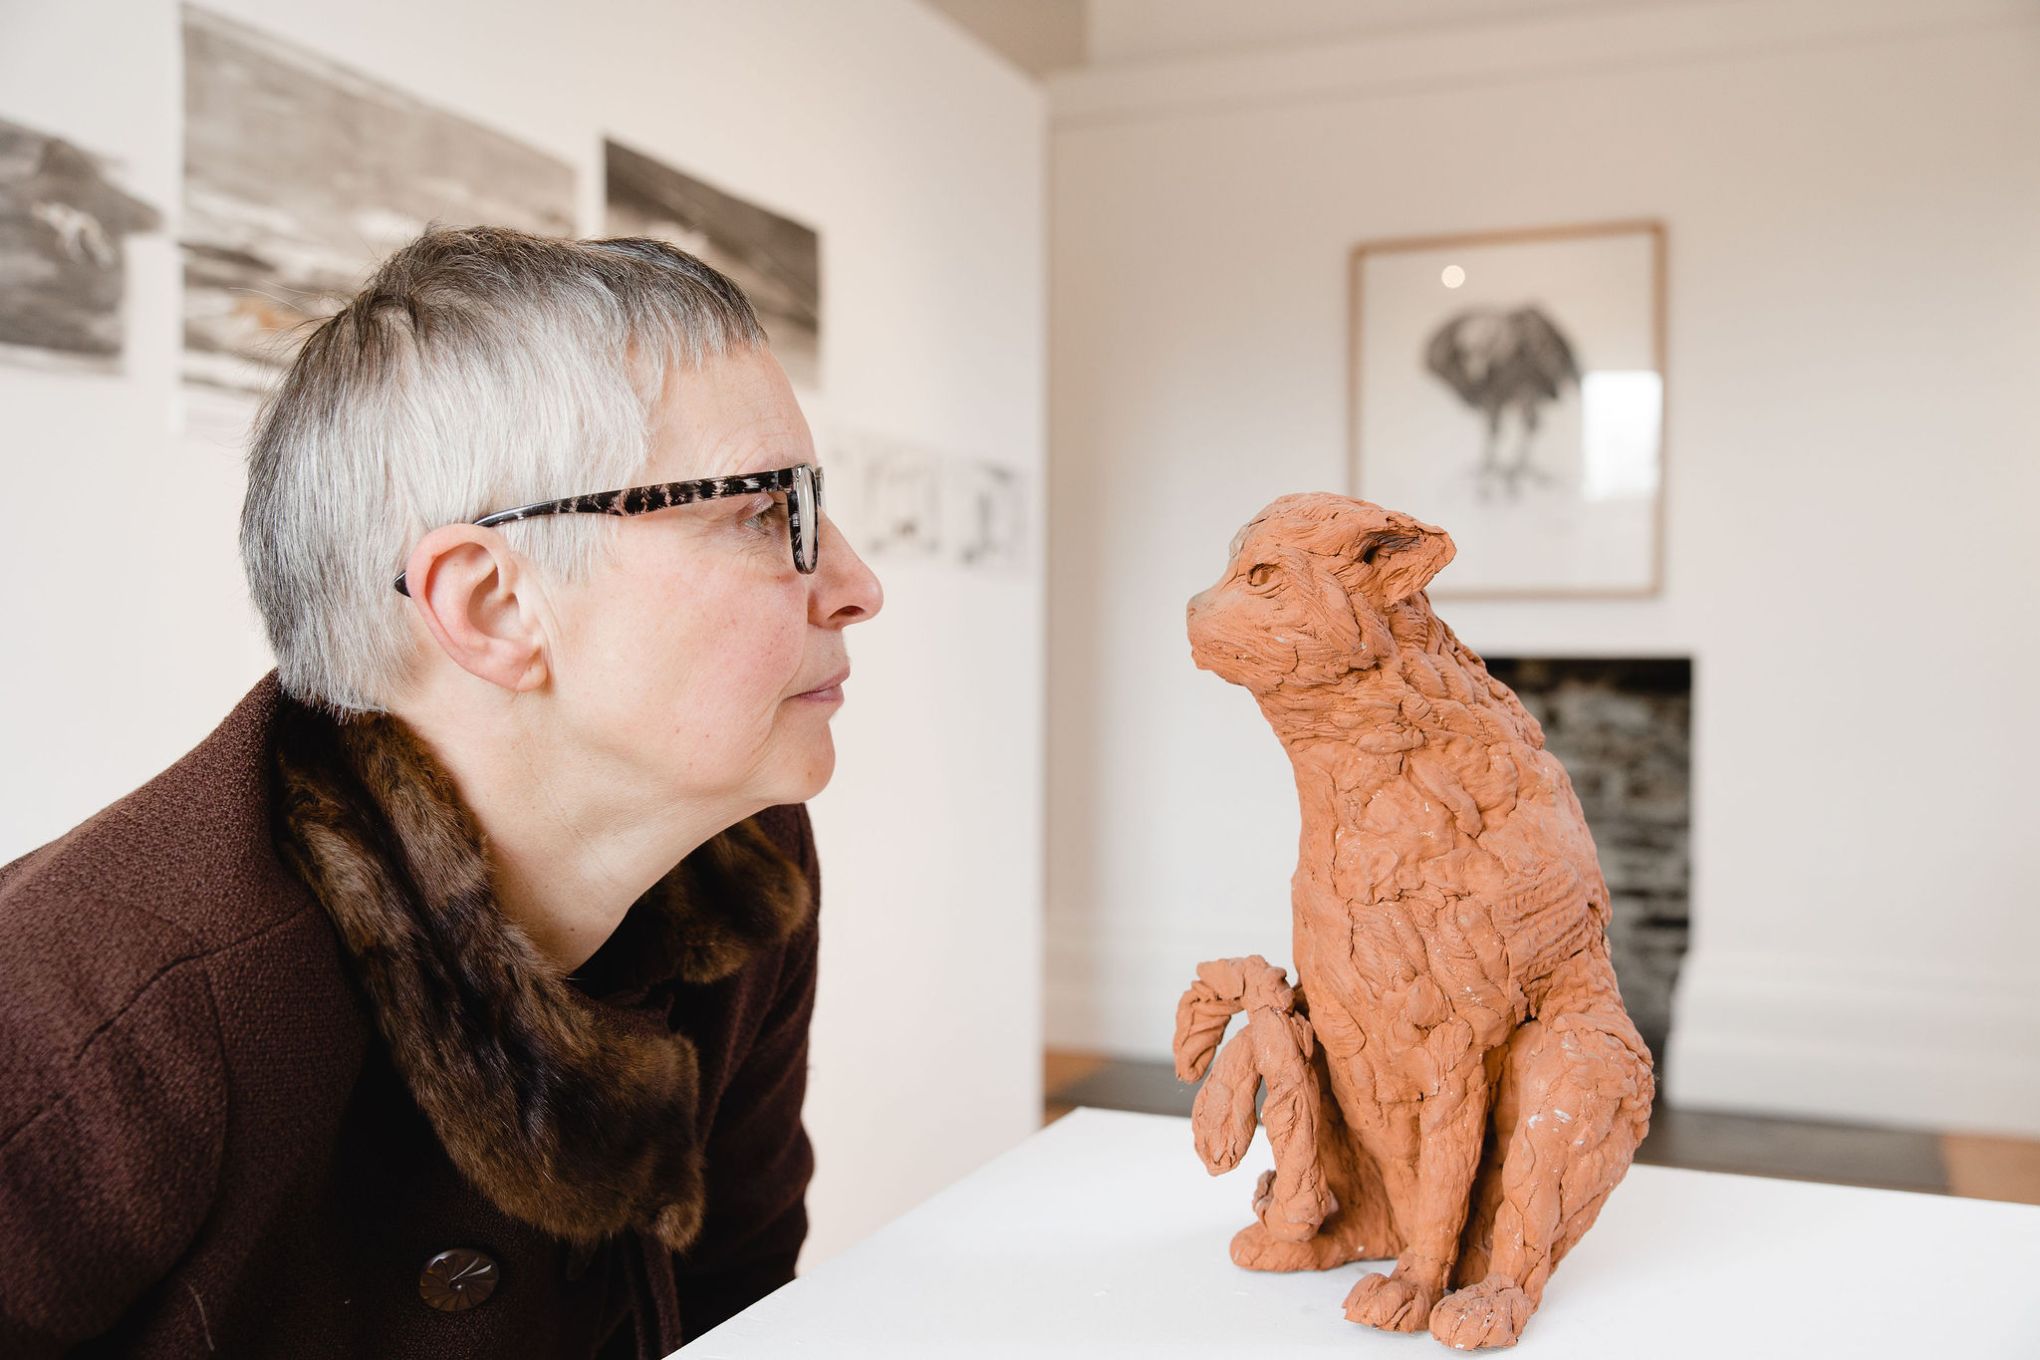 Marjan Wouda with her clay cat sculpture on display at The Whitaker, with her sketches in the background. Image by Christina Davies, Fish2Photo.